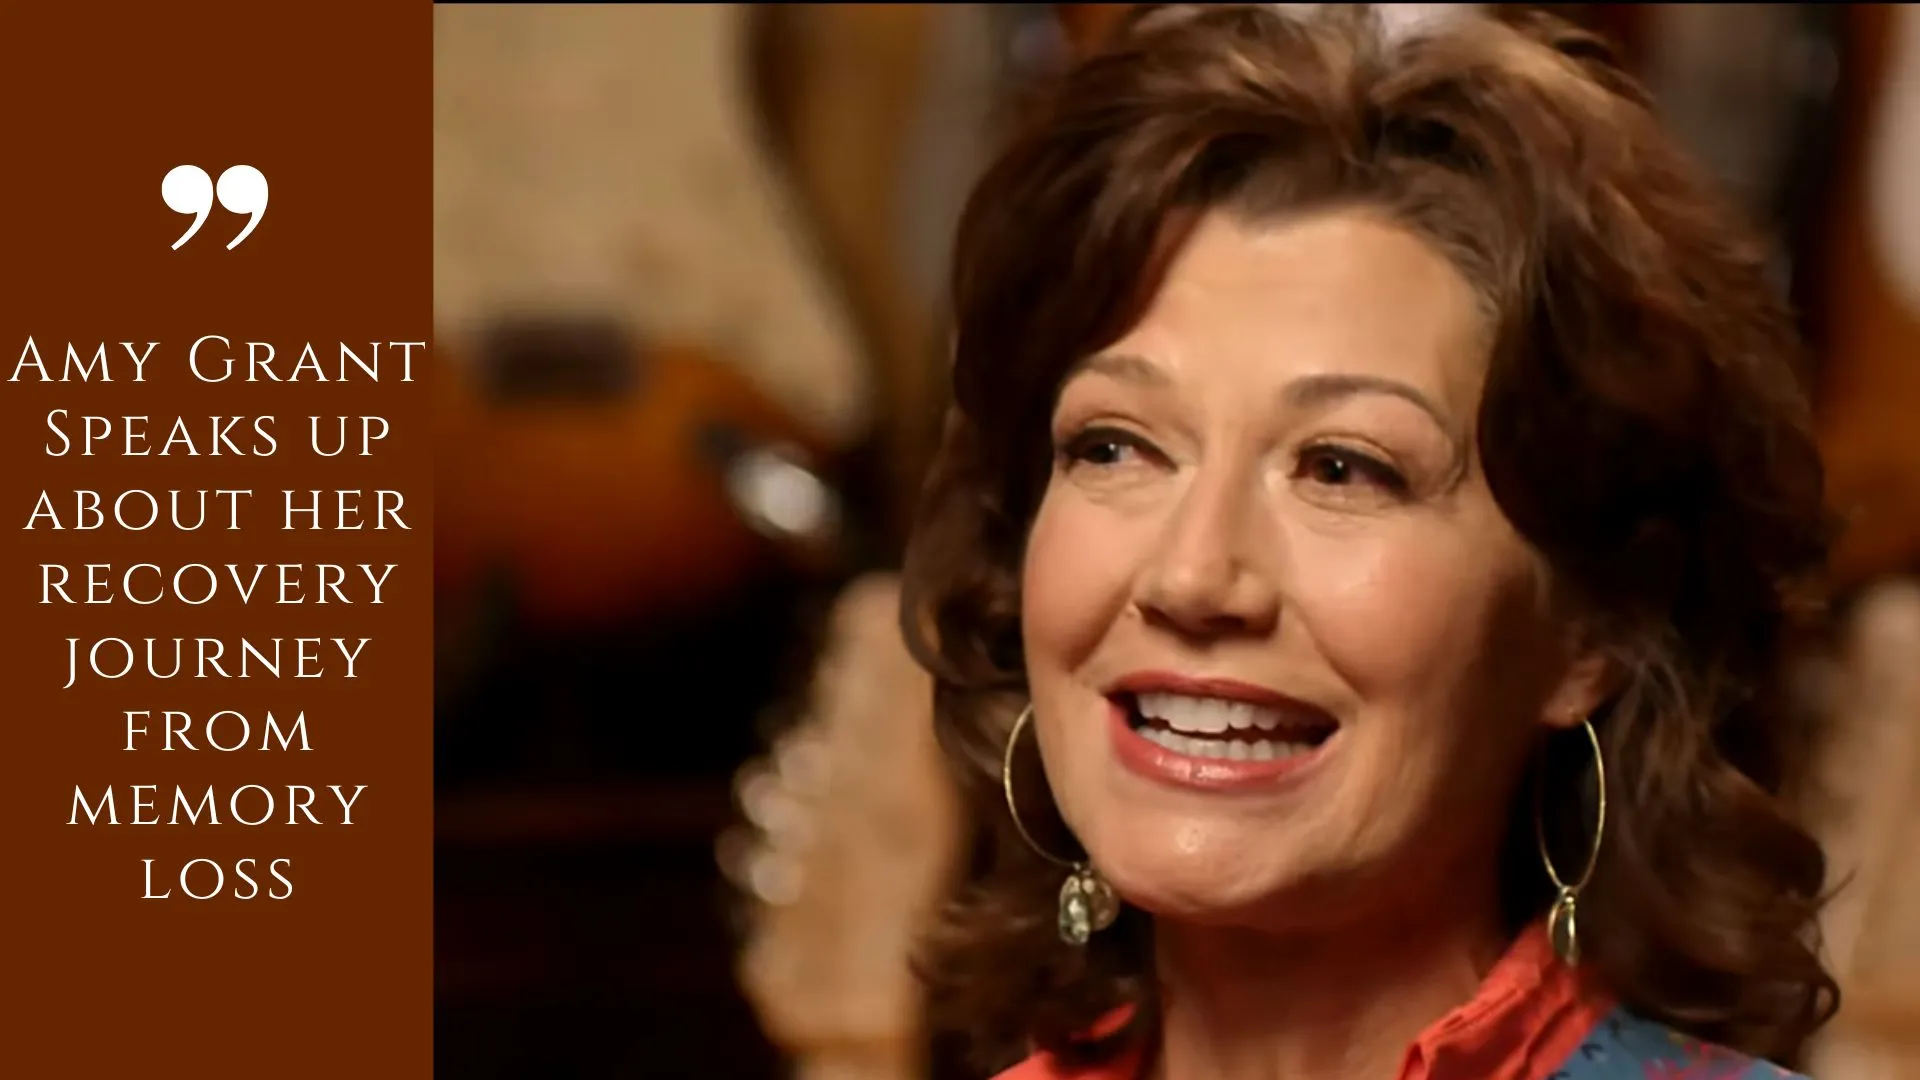 Amy Grant Speaks up about her recovery journey from memory loss (Image credit: TODAY show)